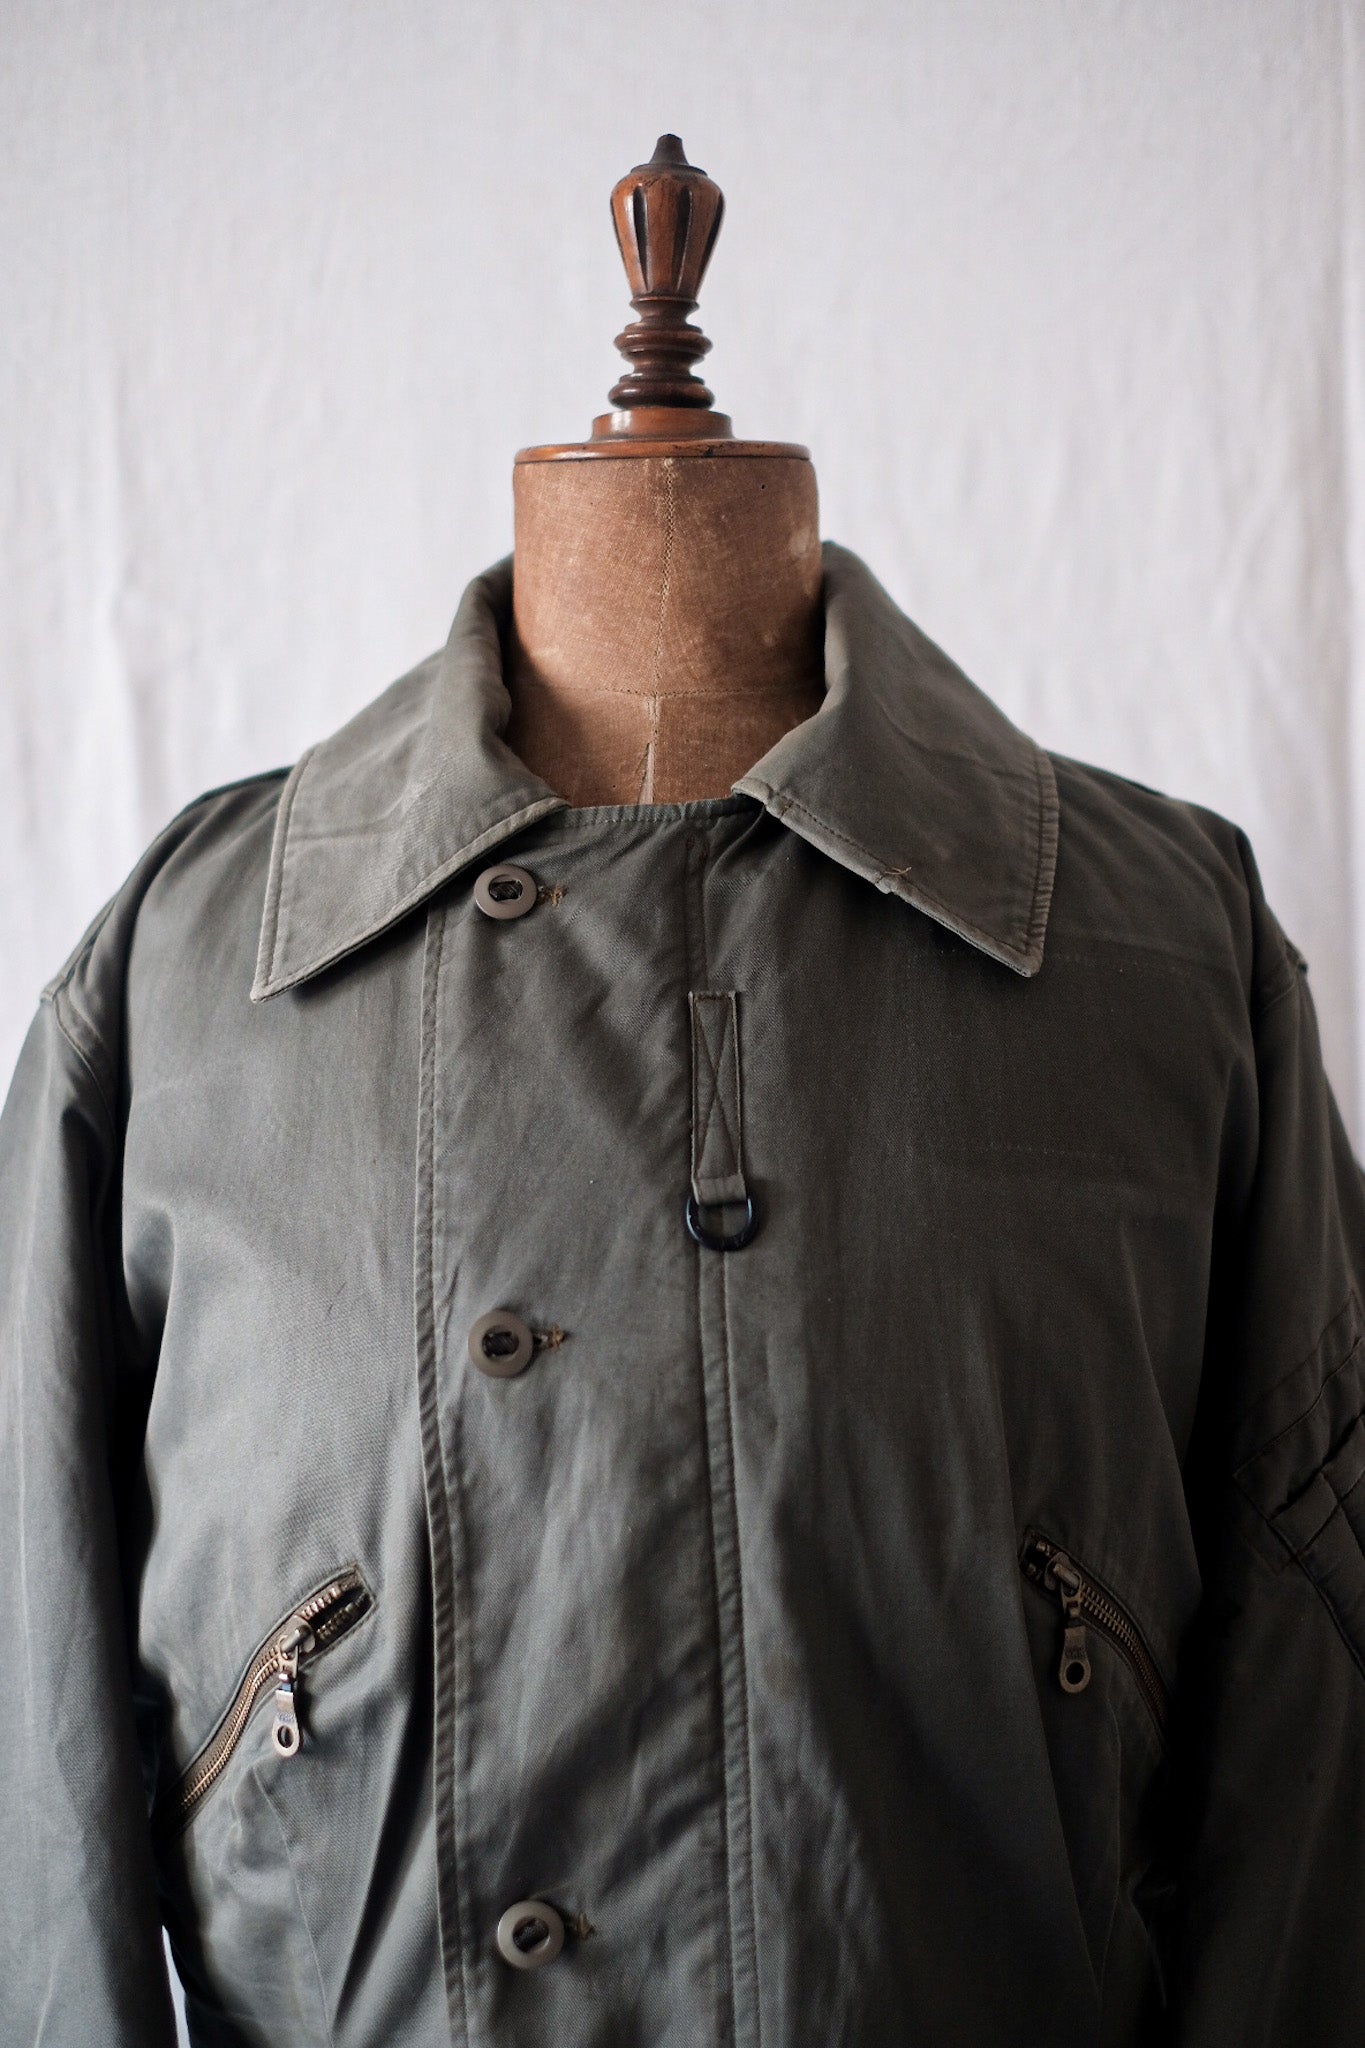 00's] ROYAL AIR FORCE MK3 COLD WEATHER FLYING JACKET SIZE.7